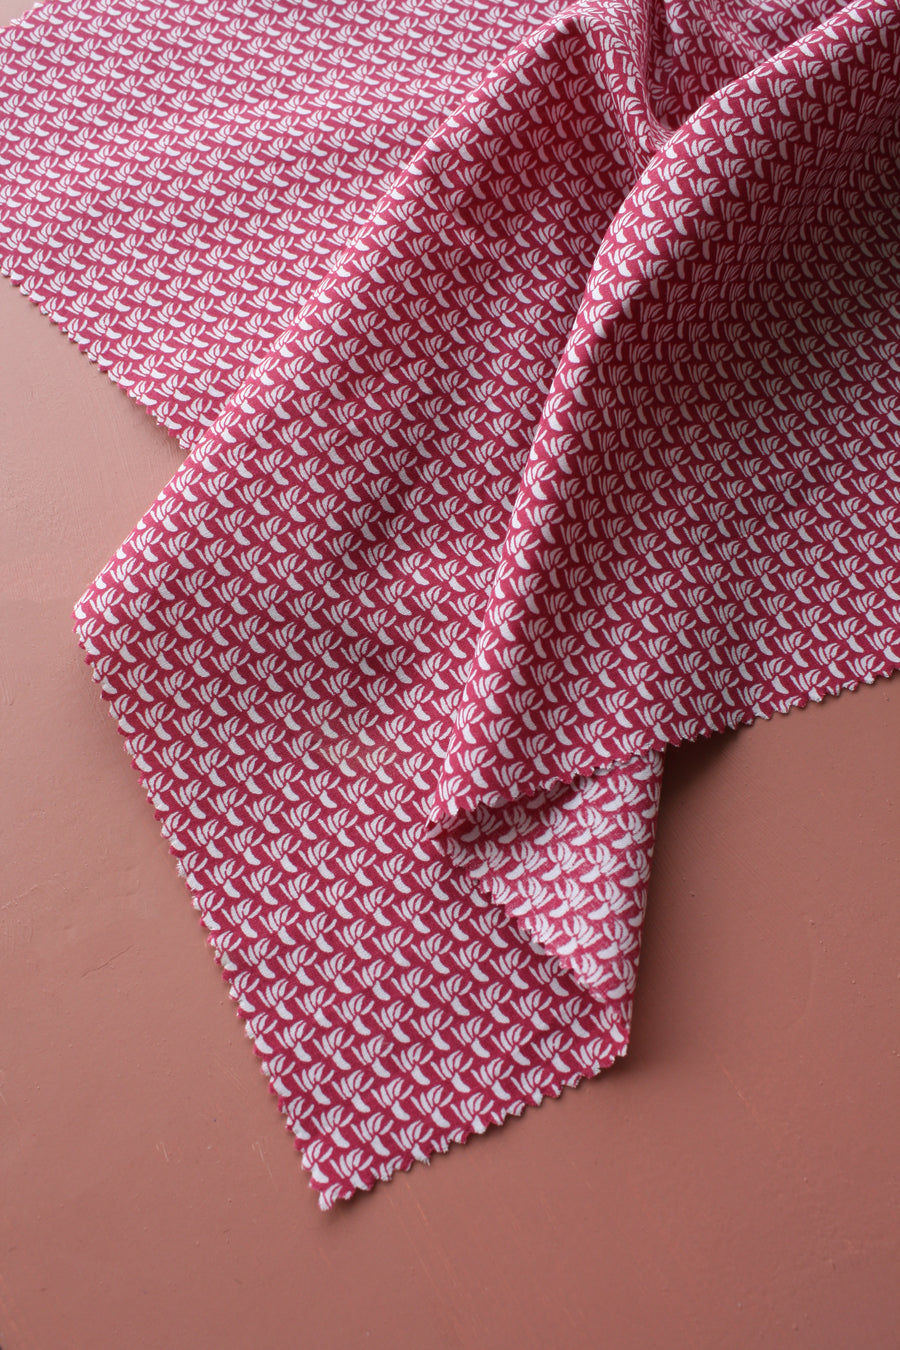 Valerie - Printed Cotton | Rosey Pink